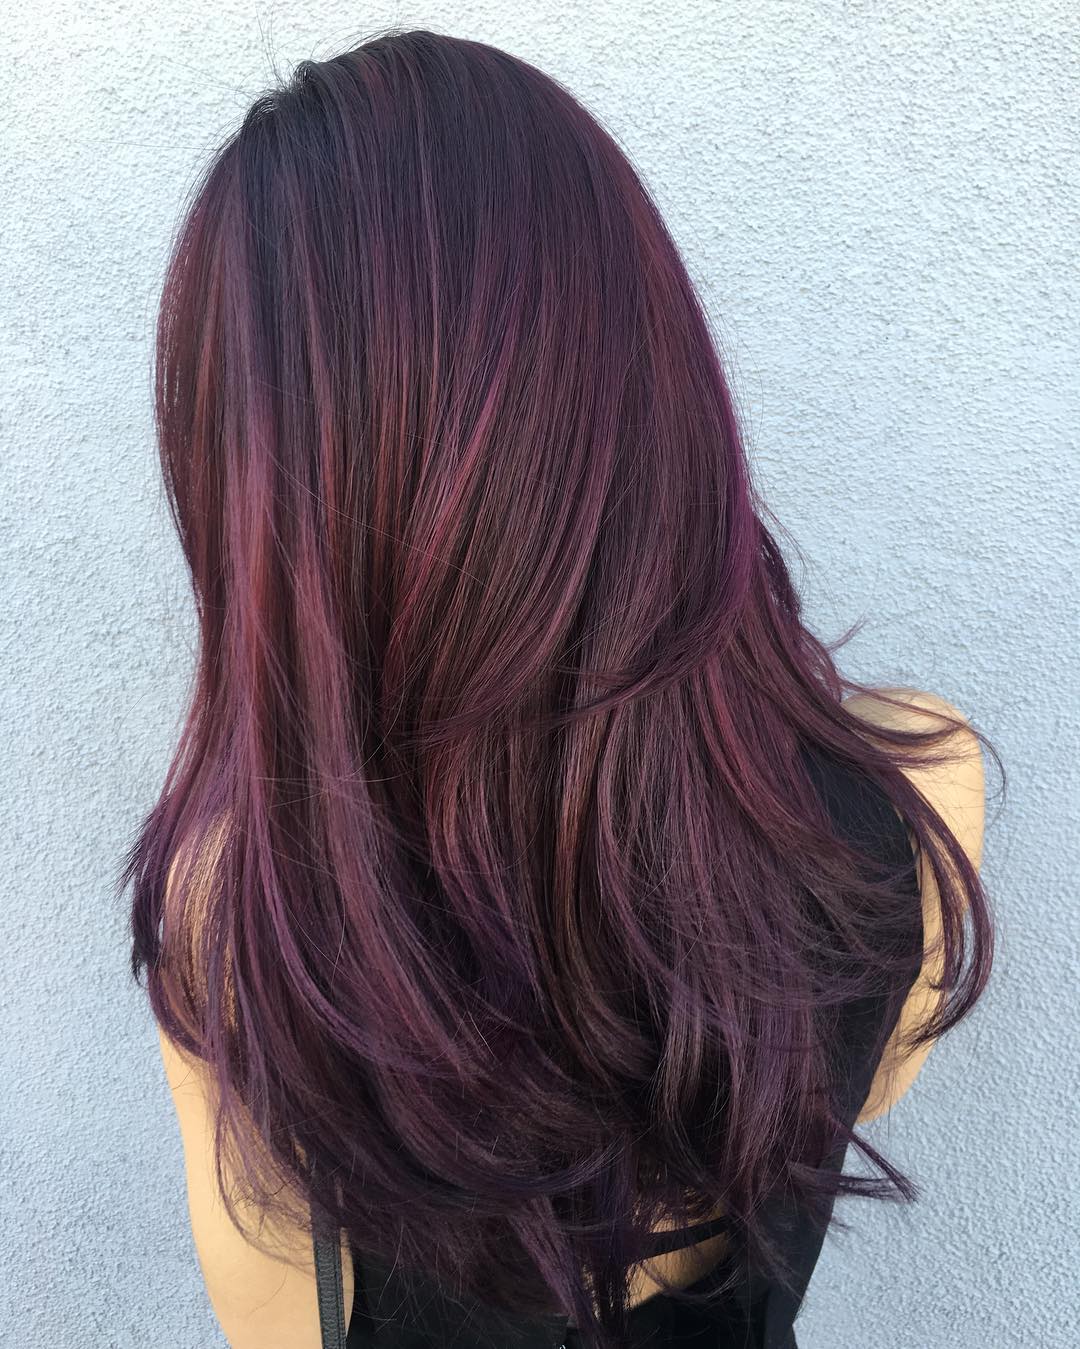 50 Shades of Burgundy Hair Color for 2021